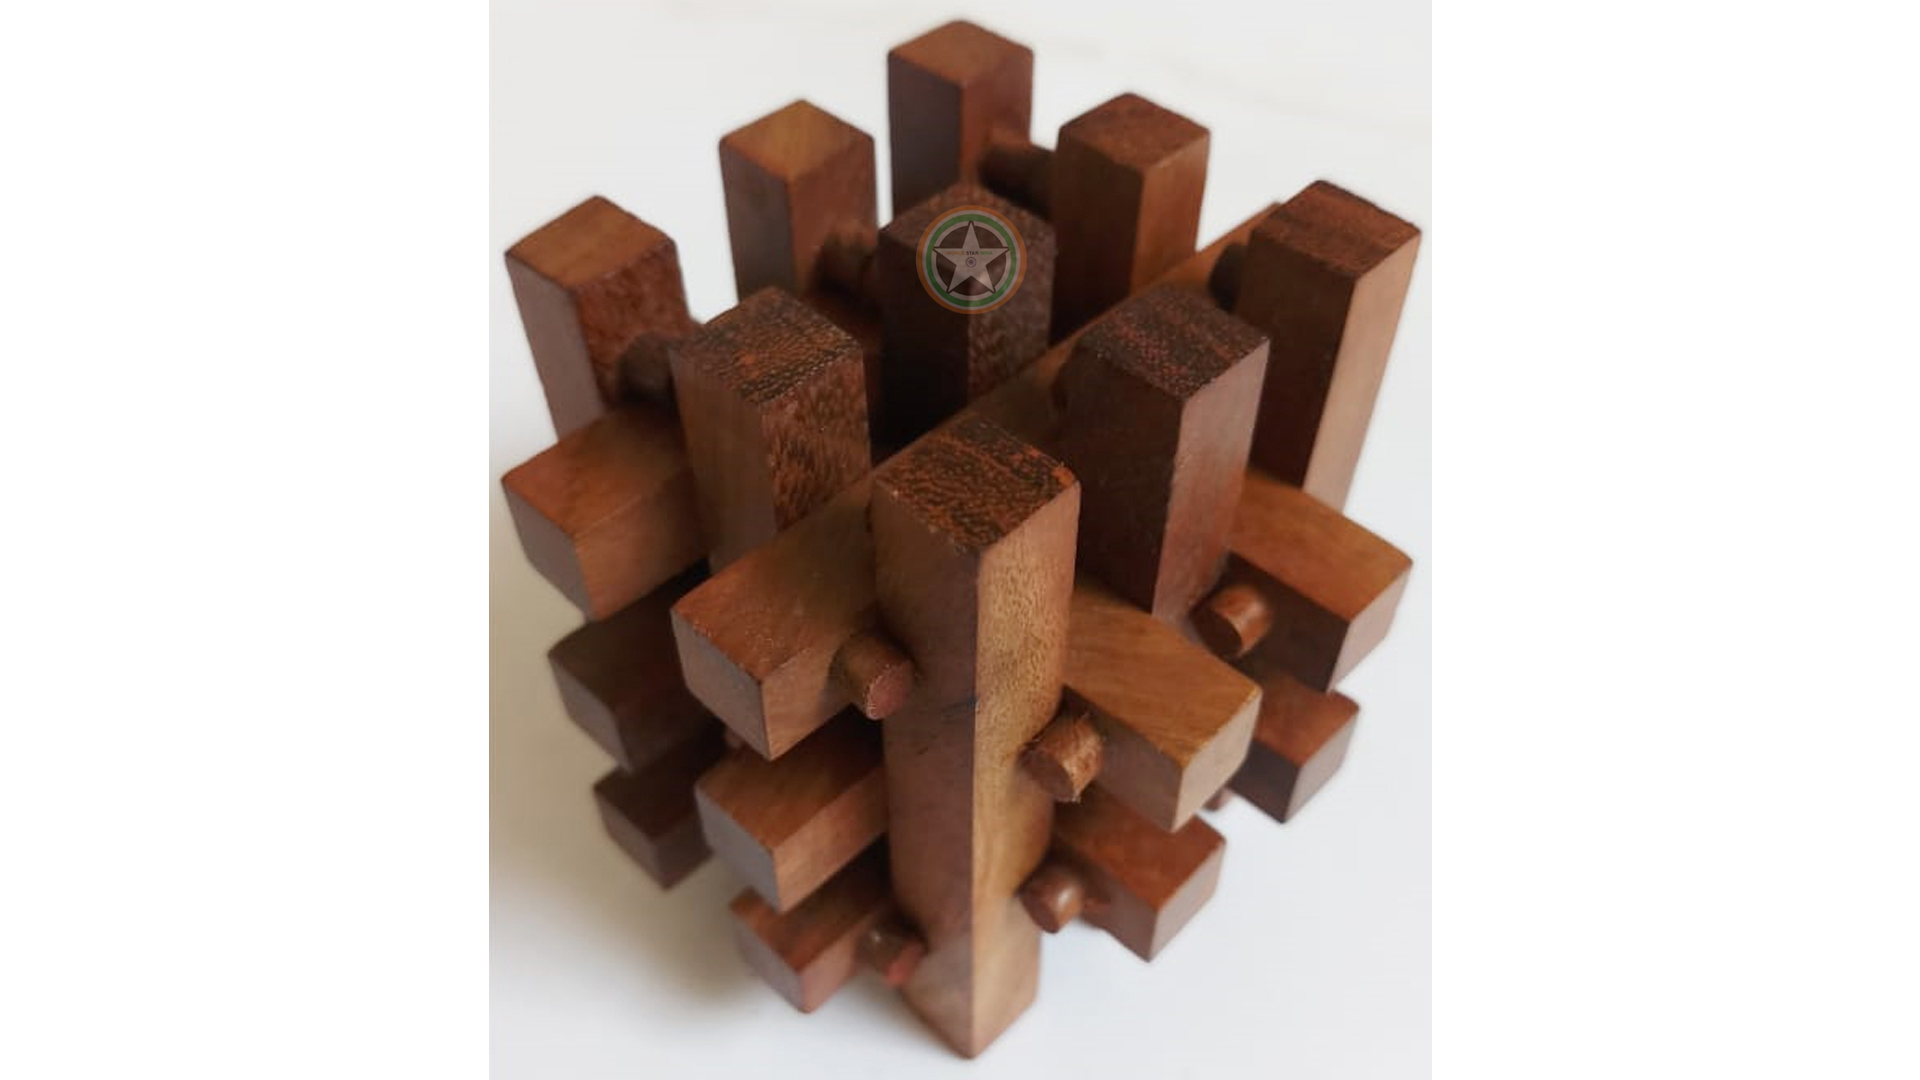 WORLD STAR INDIA Wooden Burr Puzzle/Jigsaw Puzzle/Puzzle Cube/Building Puzzle/Hard Interesting Game for Fun/Super Minded Game for Kids and Adult Diagonal Cube in 19 Wood Pieces Interlocking Block Game from World Star India